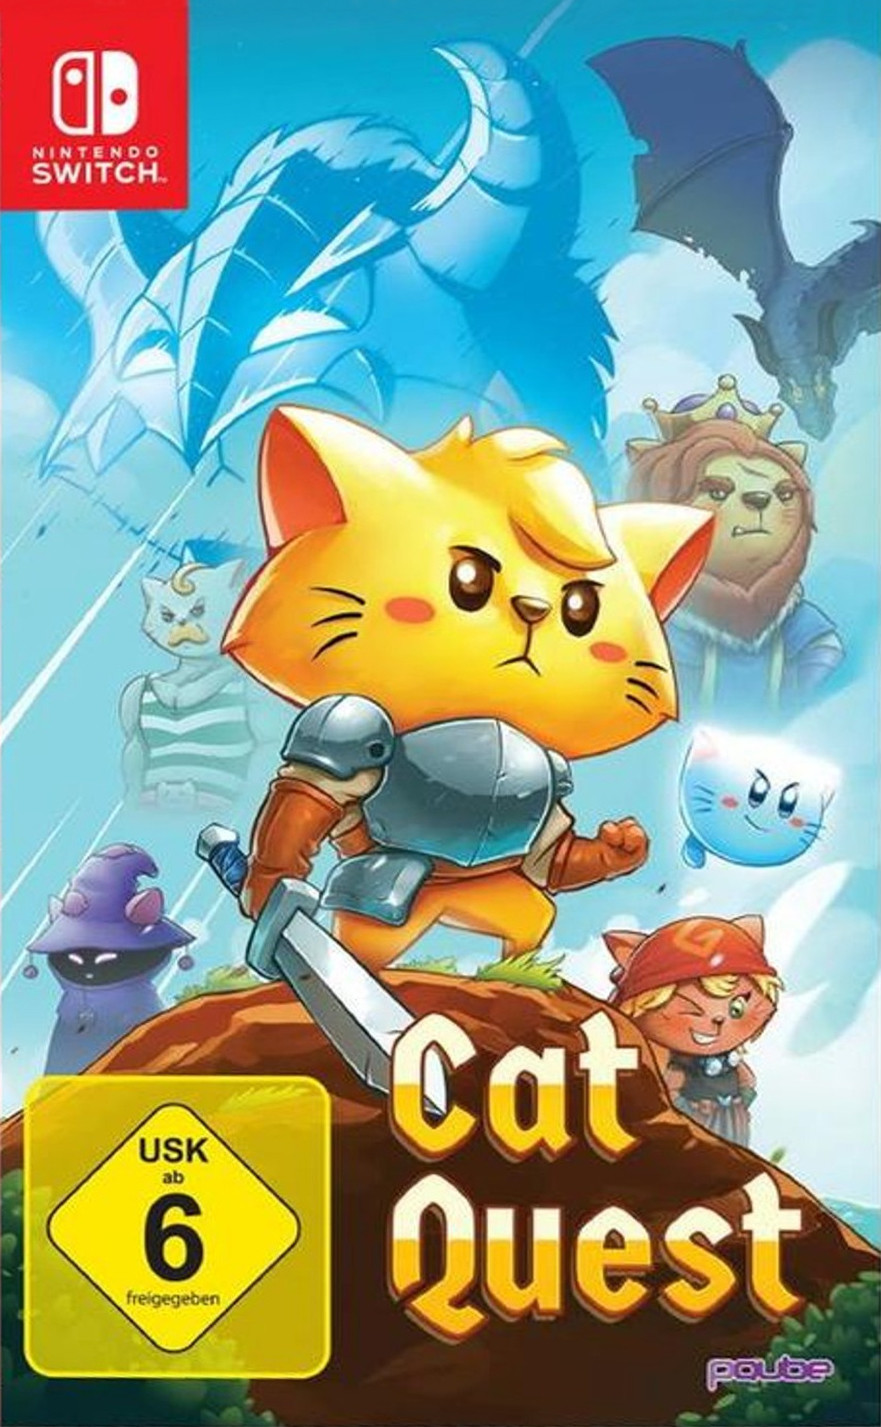 cat quest switch review